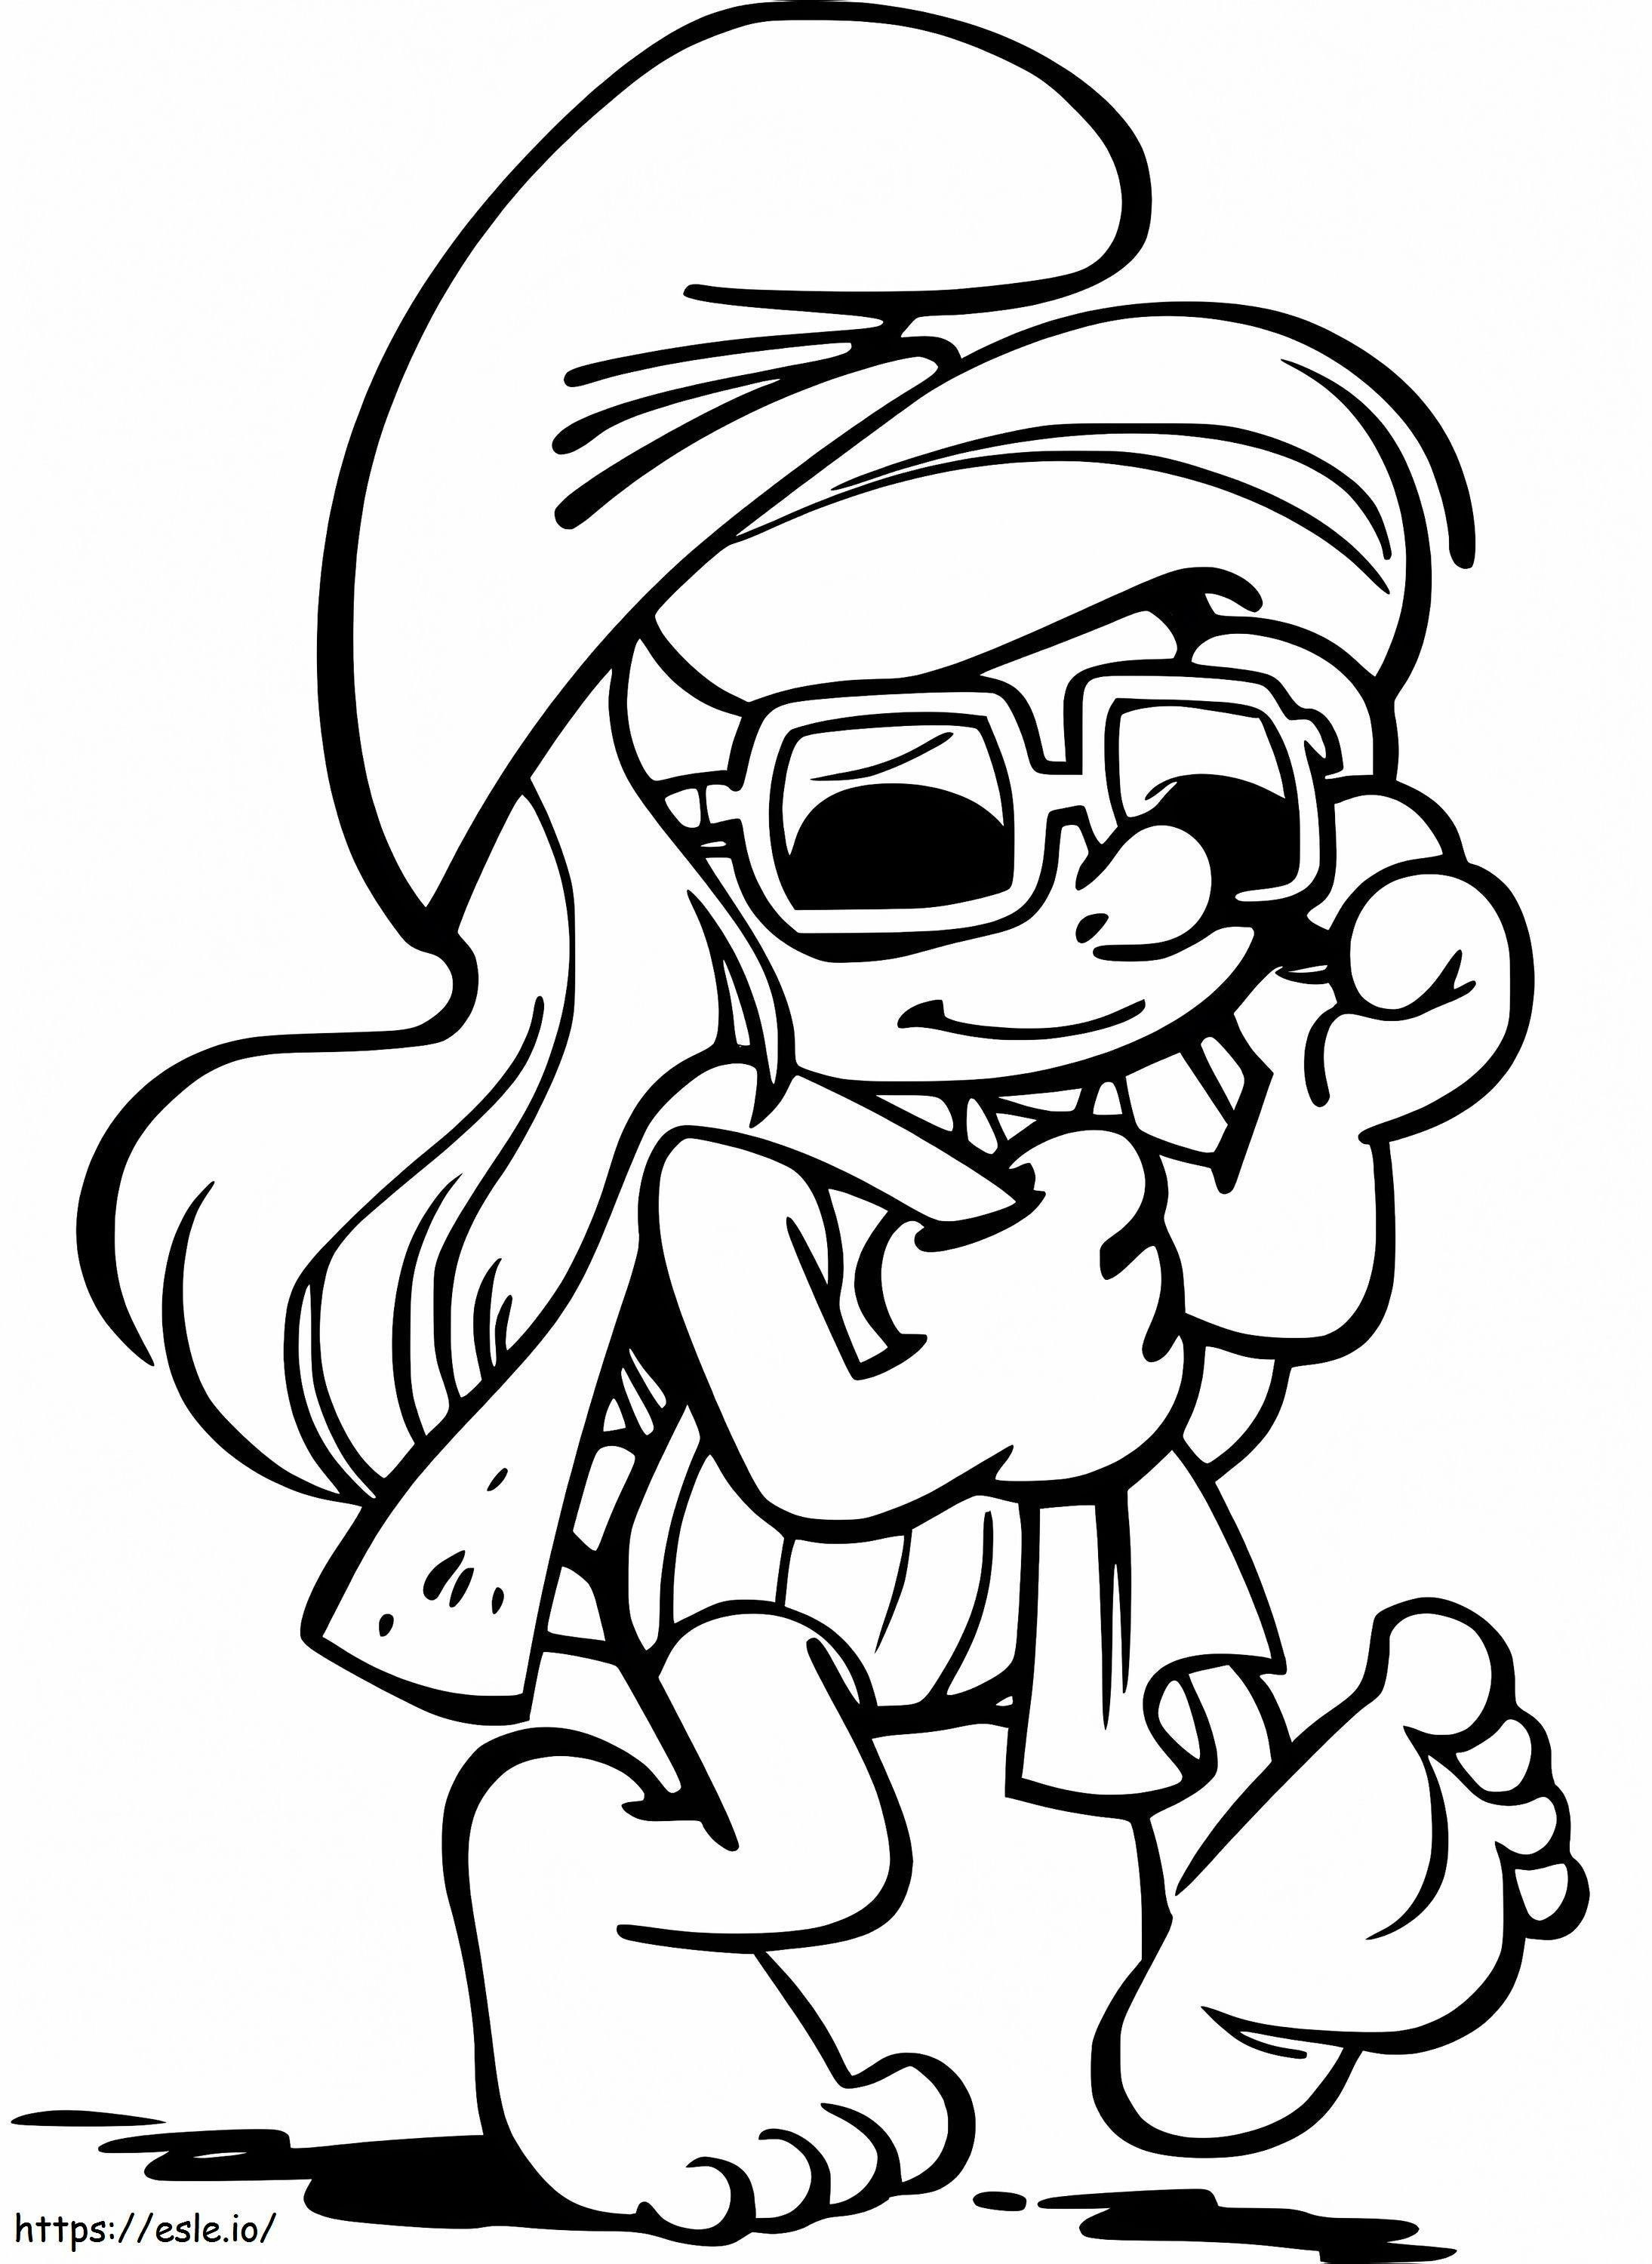 Relaxing Smurfette coloring page